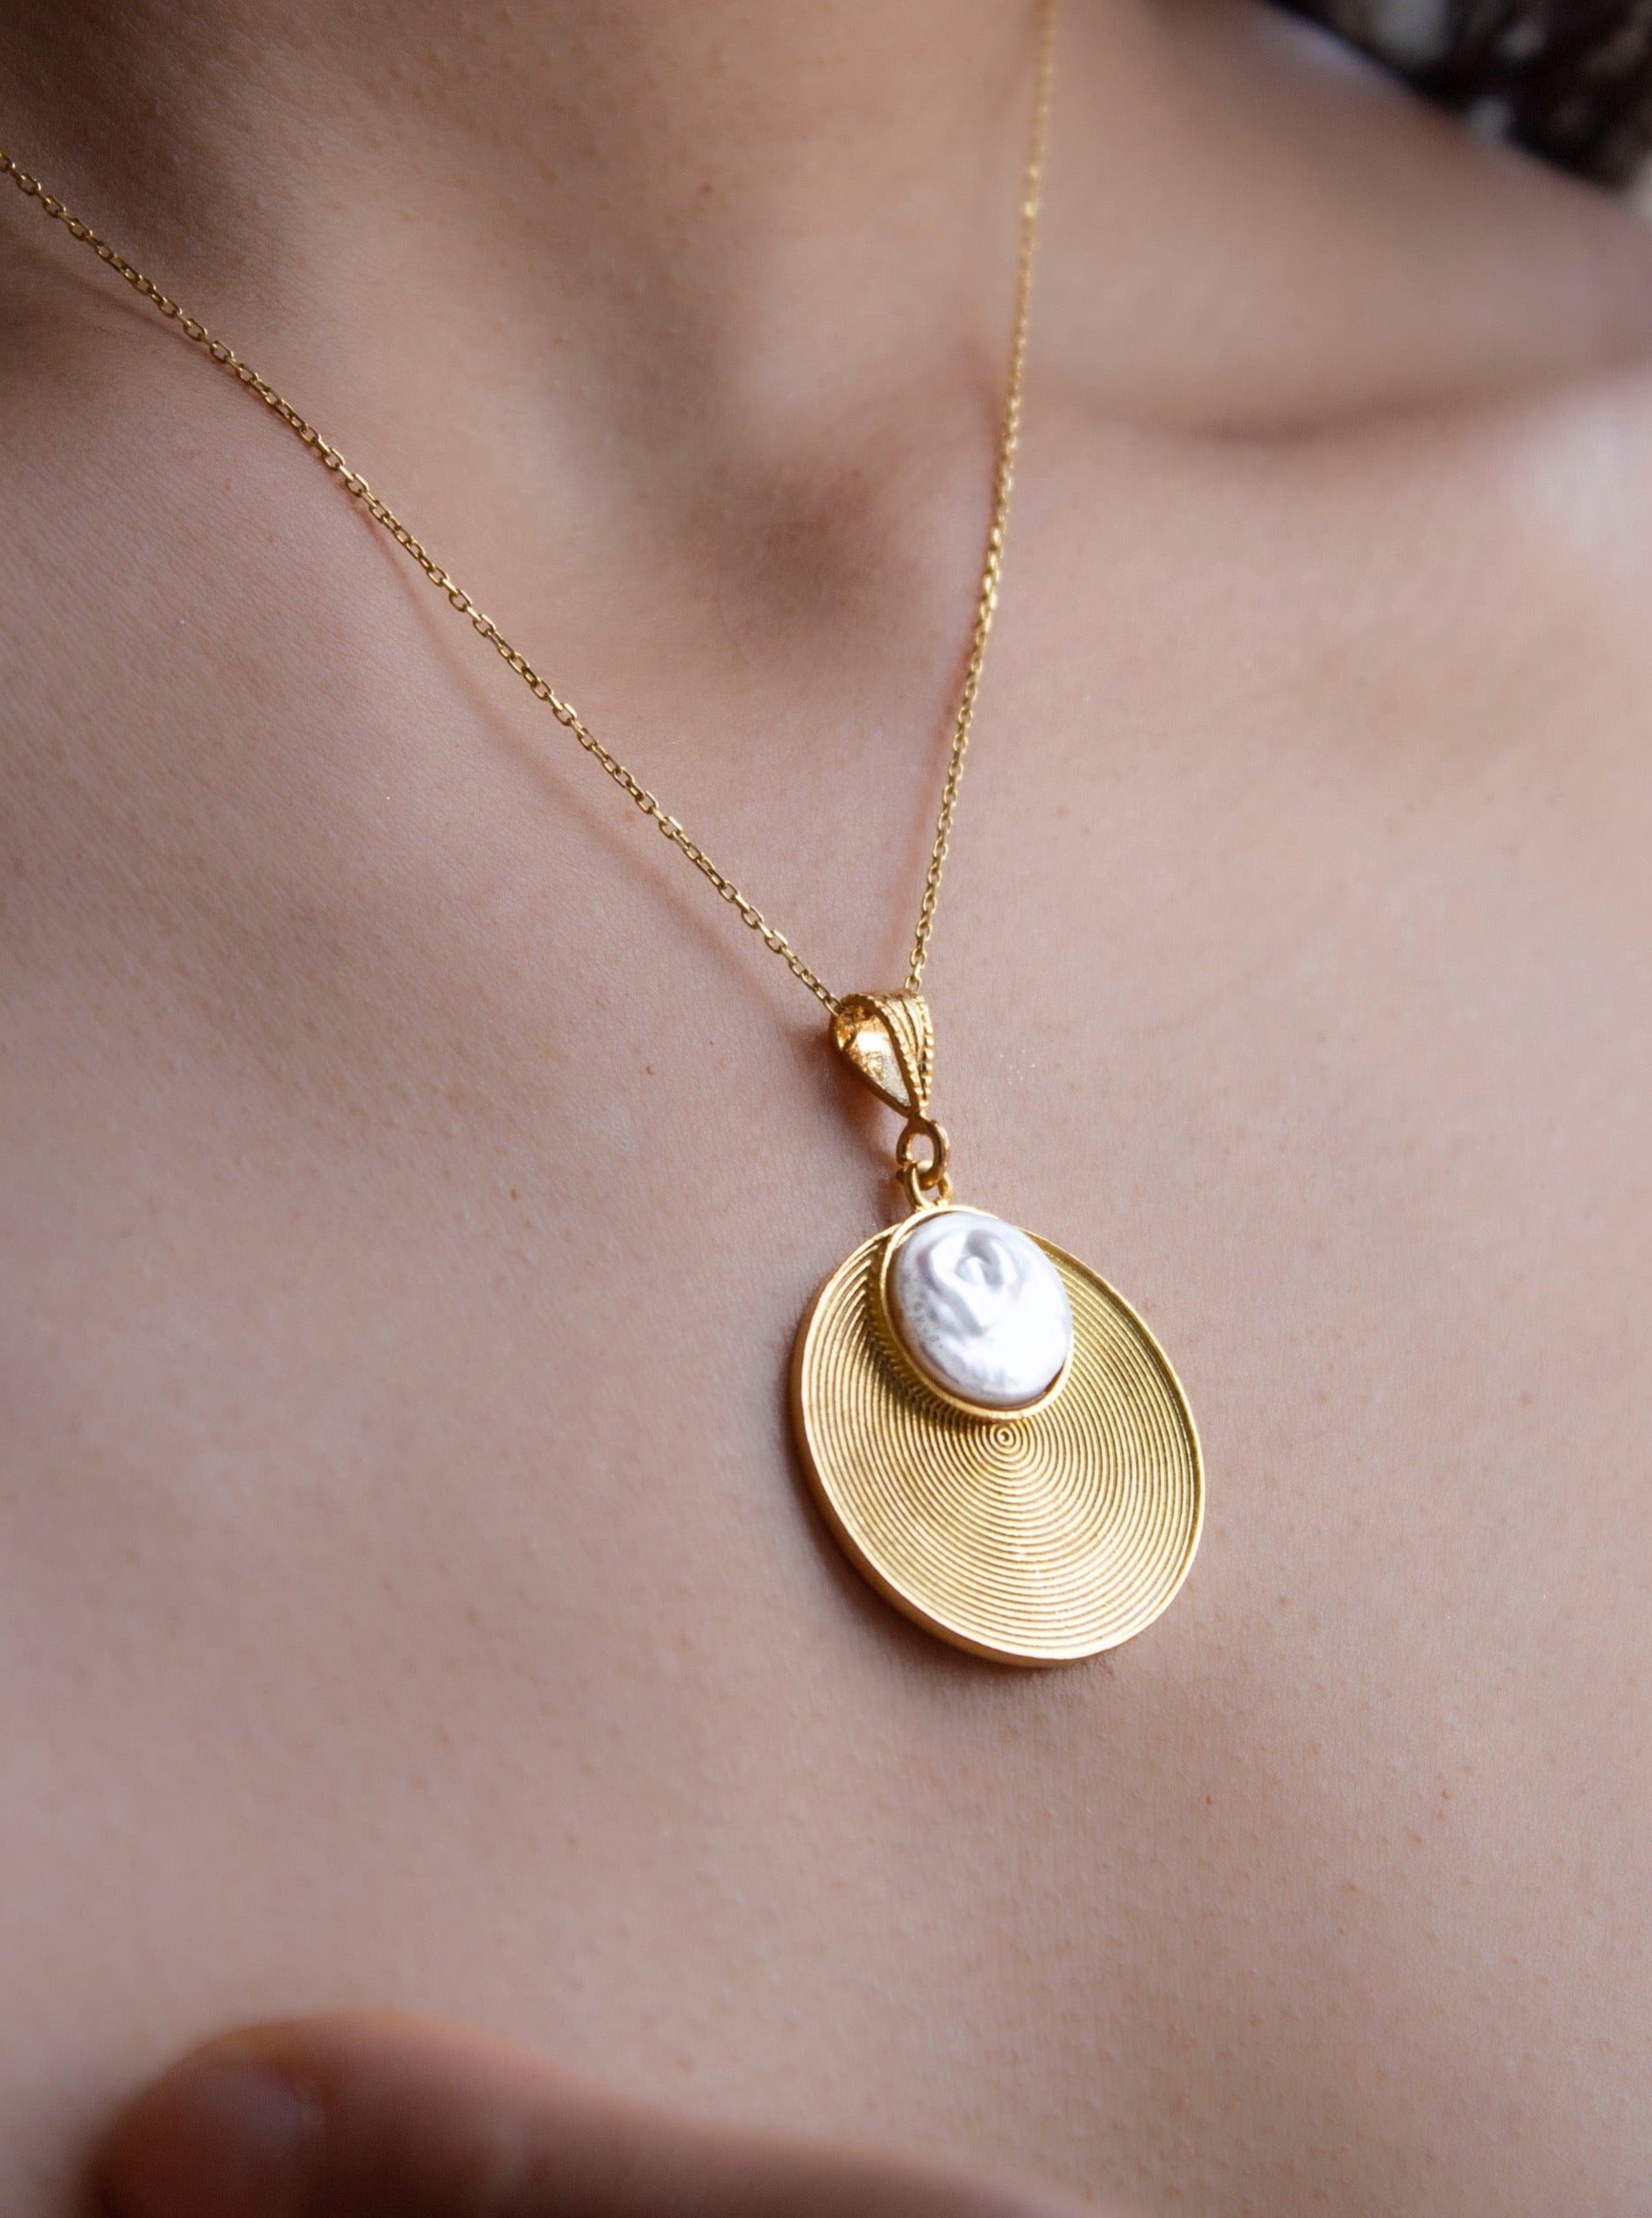 Necklace with gold-plated spiral engraving and an original pearl piece